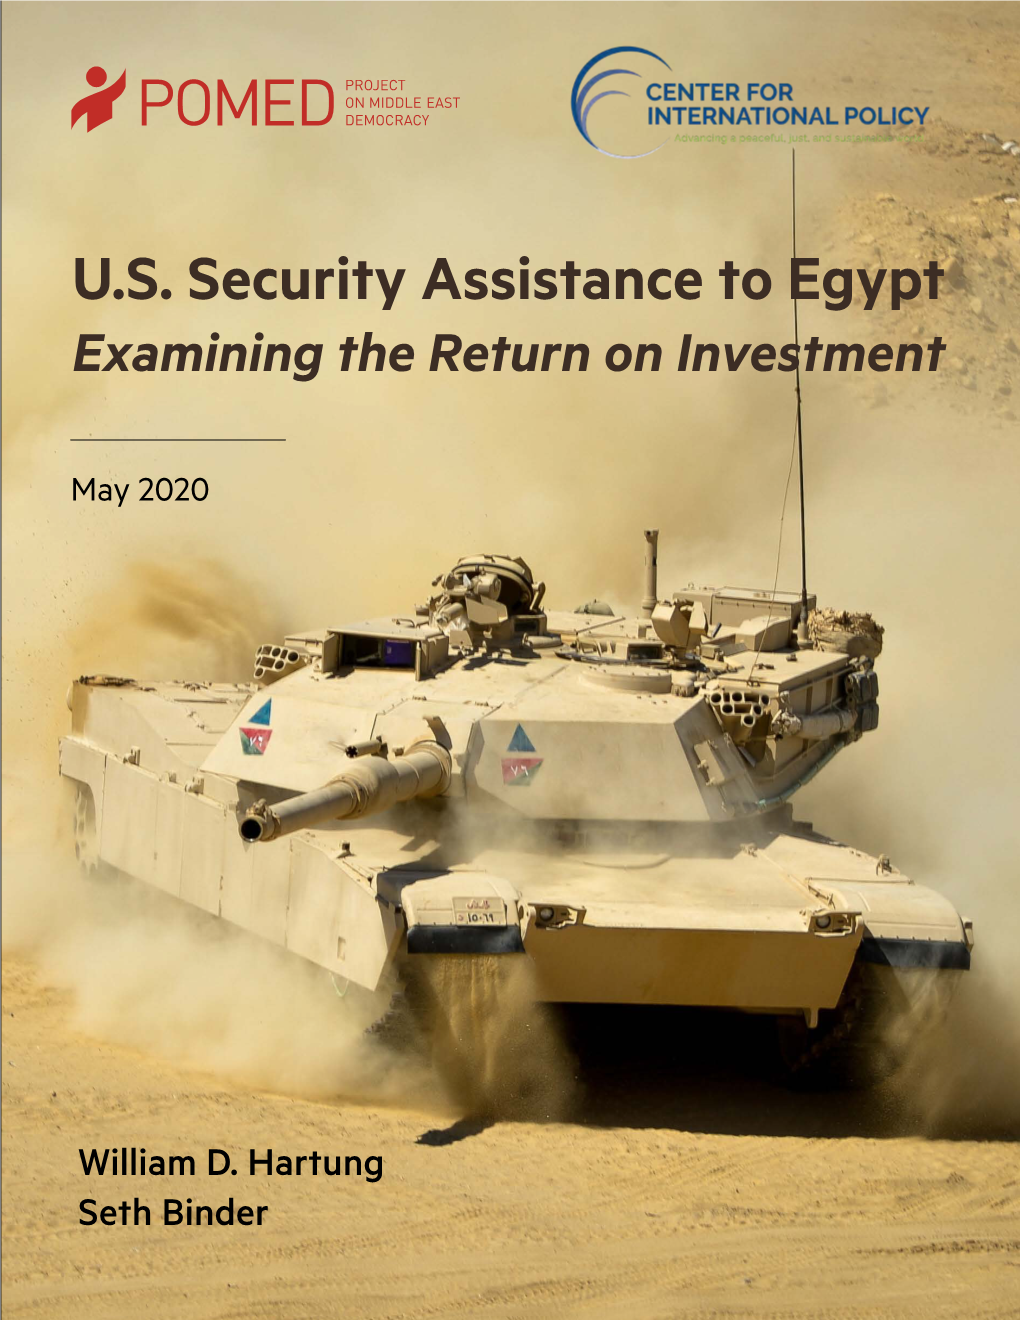 U.S. Security Assistance to Egypt Examining the Return on Investment